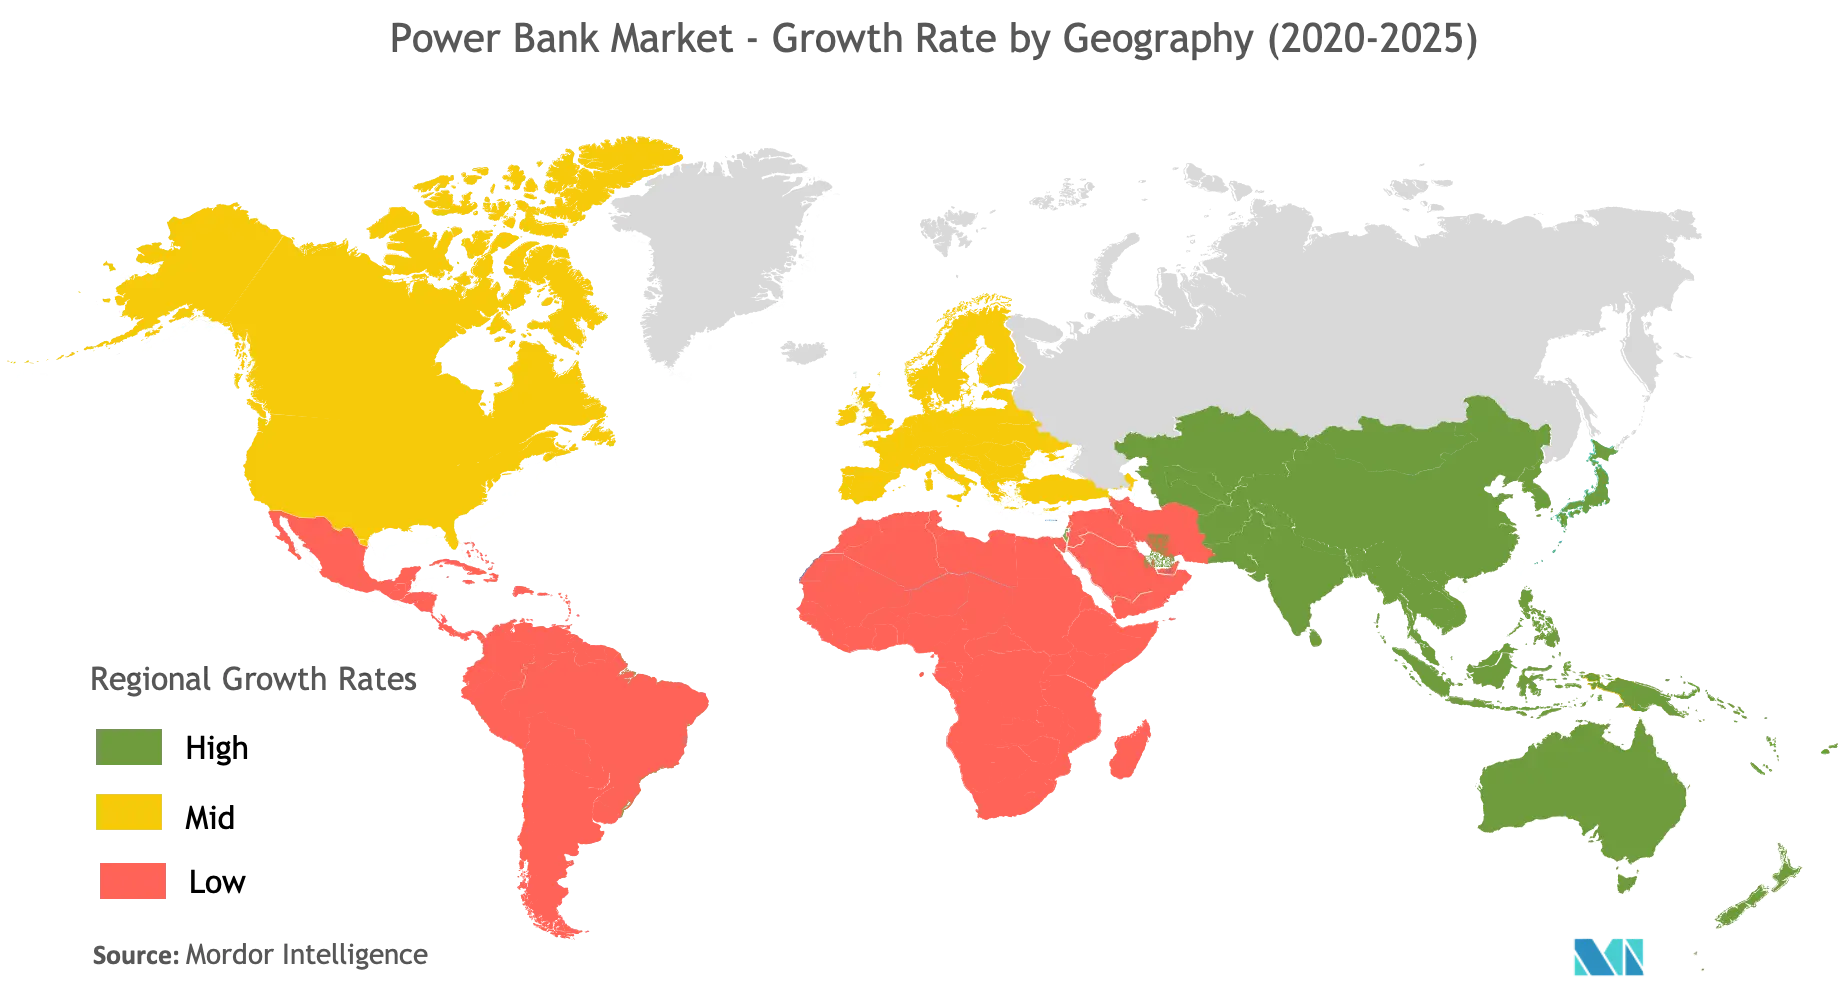 Power Bank Market Growth Rate